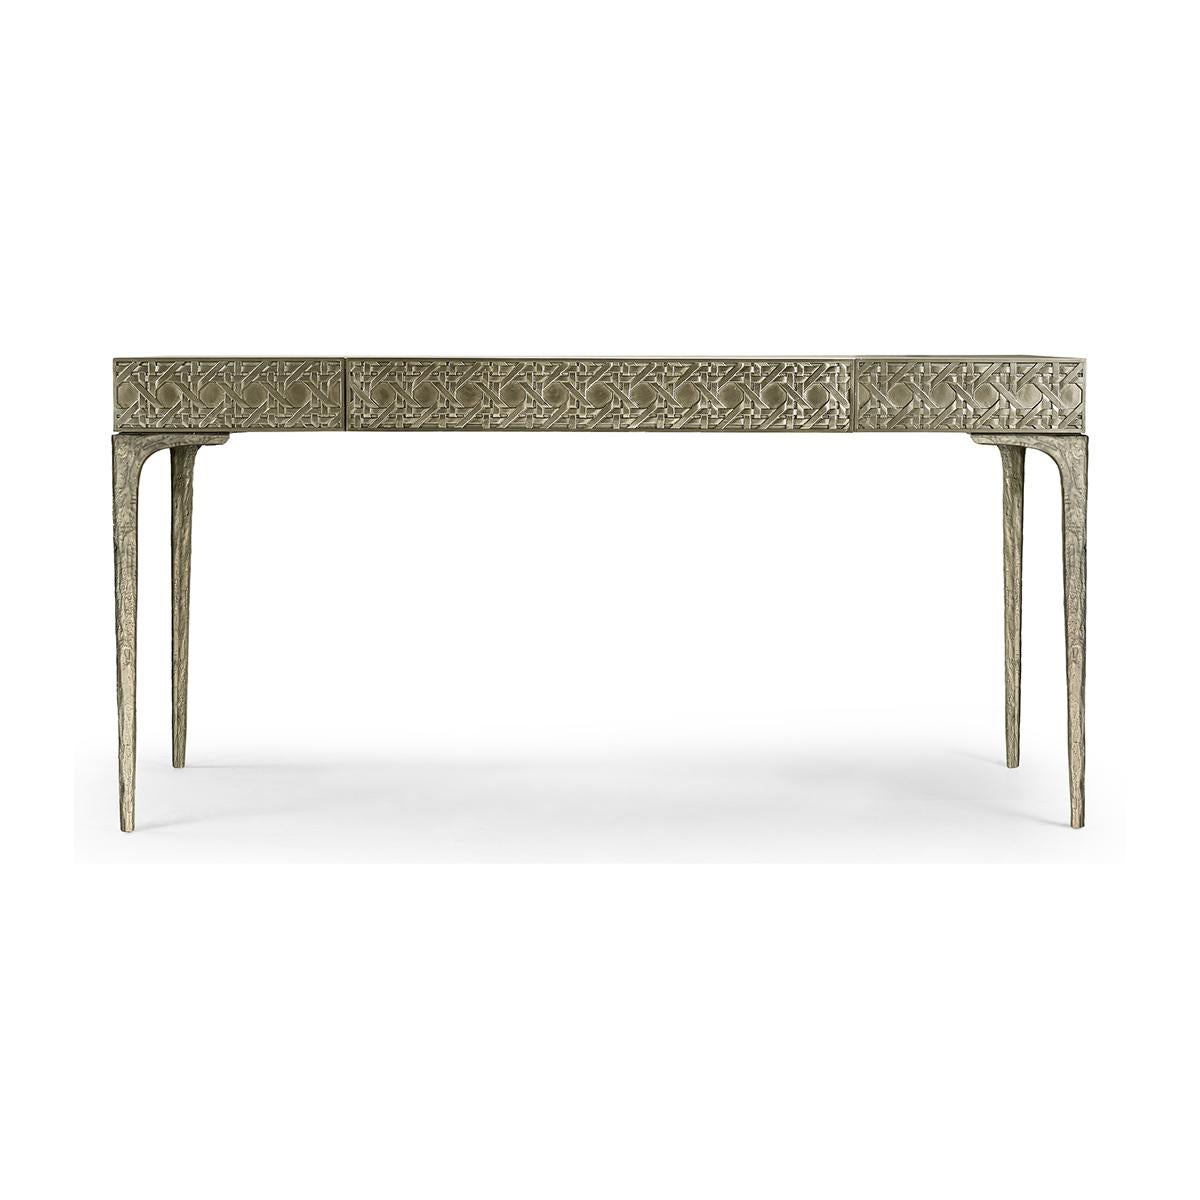 Modern Metal Leather top desk, featuring a digitally carved, traditional woven cane design. The carved metal desk boasts mesmerizing textural layers.

The carved aluminum case is paired flawlessly with a drop-in leather top and organically